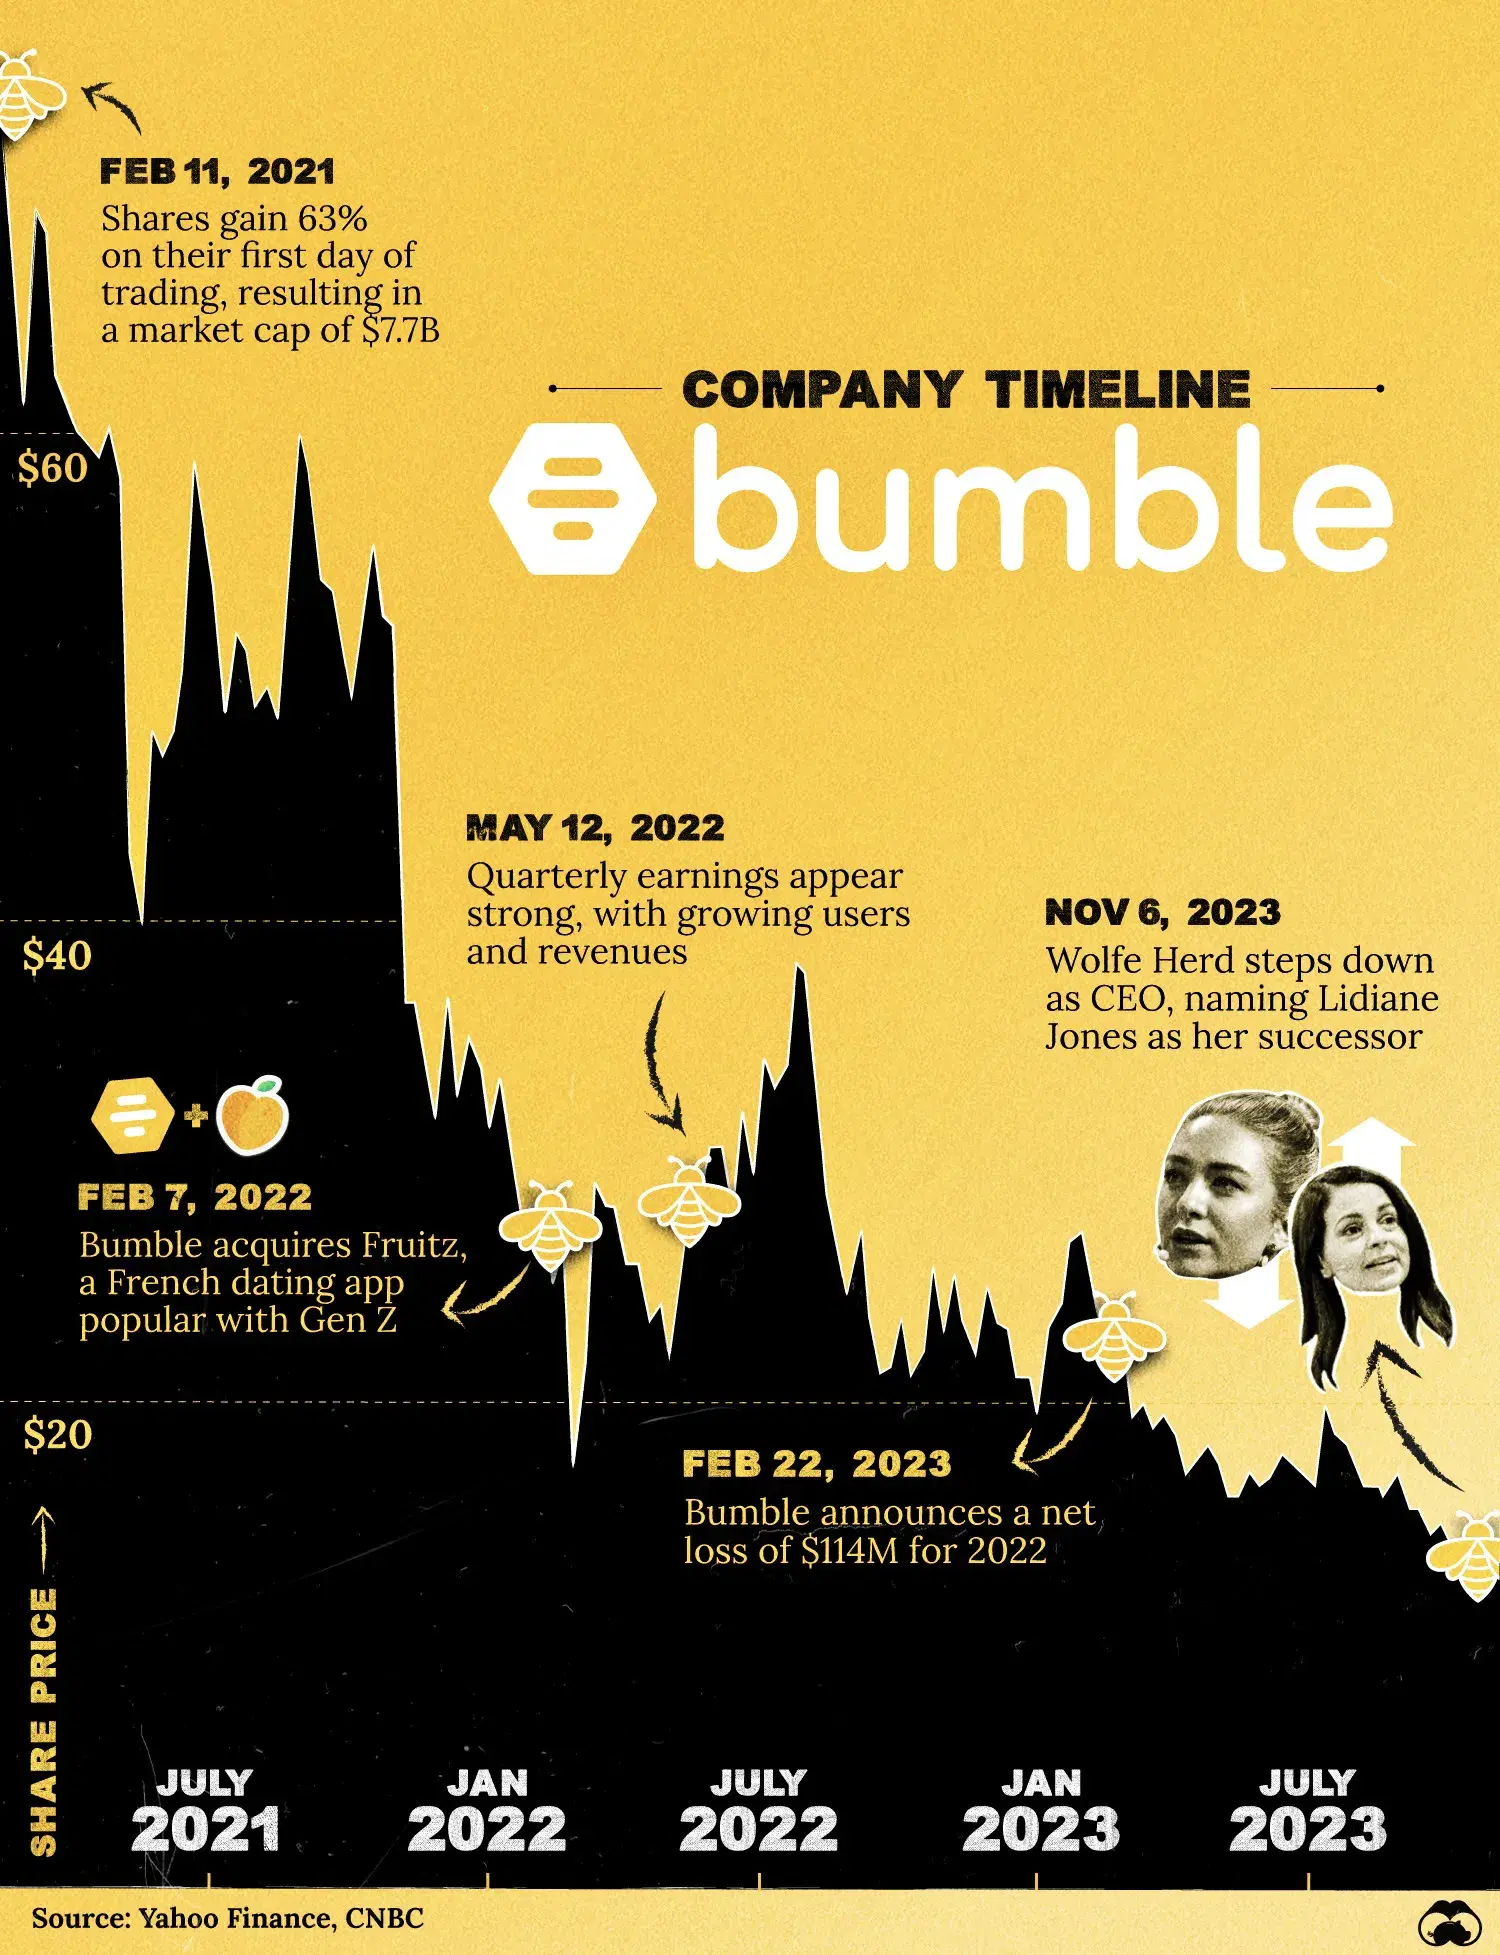 Bumble Appoints a New CEO After Shares Fall 80%